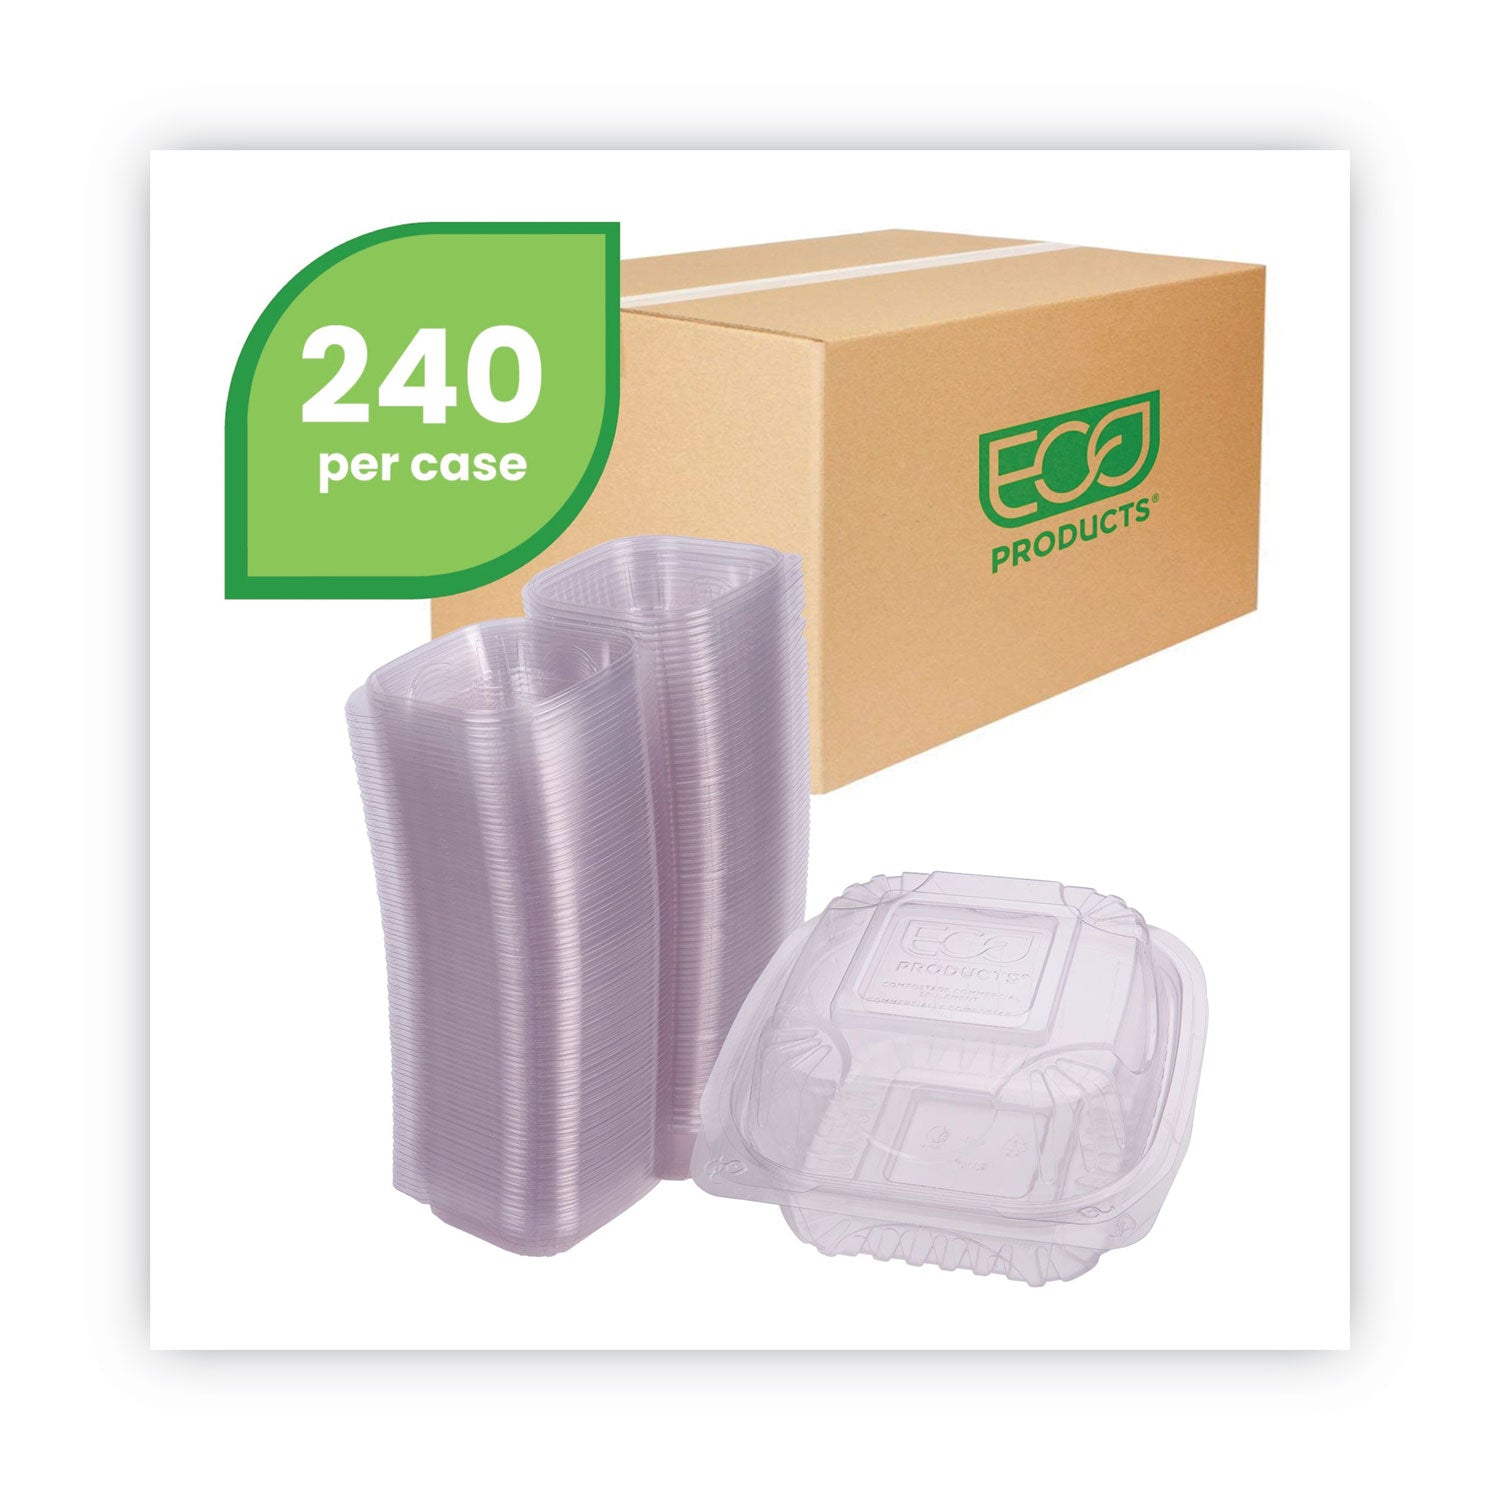 clear-clamshell-hinged-food-containers-6-x-6-x-3-plastic-80-pack-3-packs-carton_ecoeplc6 - 2